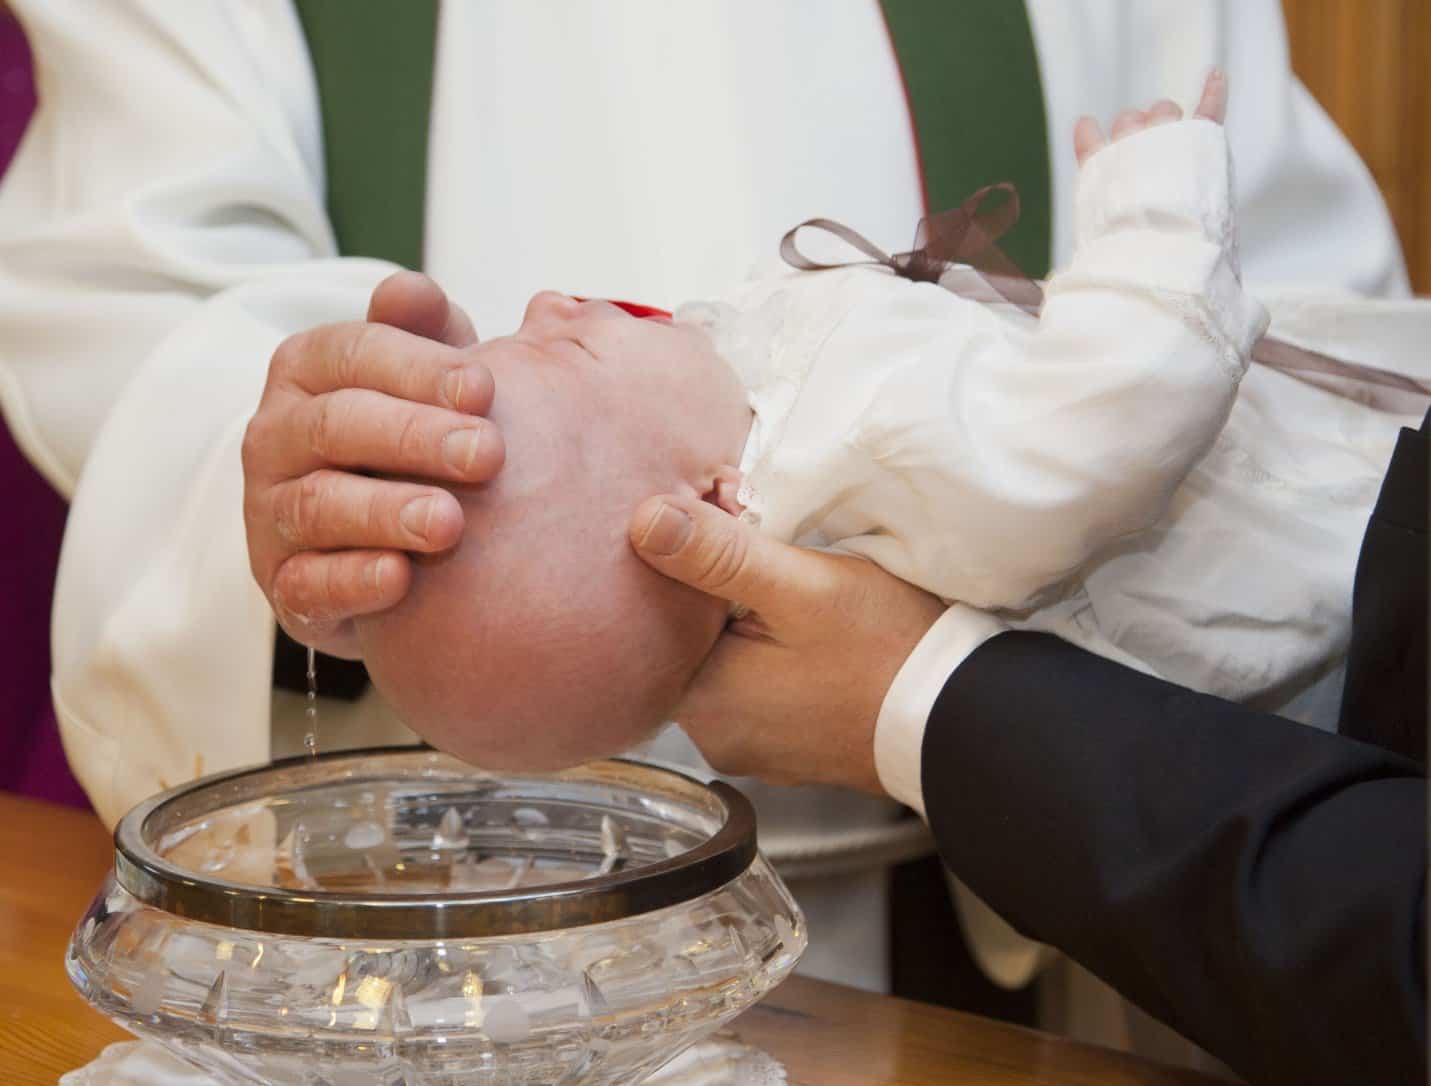 Do Christians believe in baptism